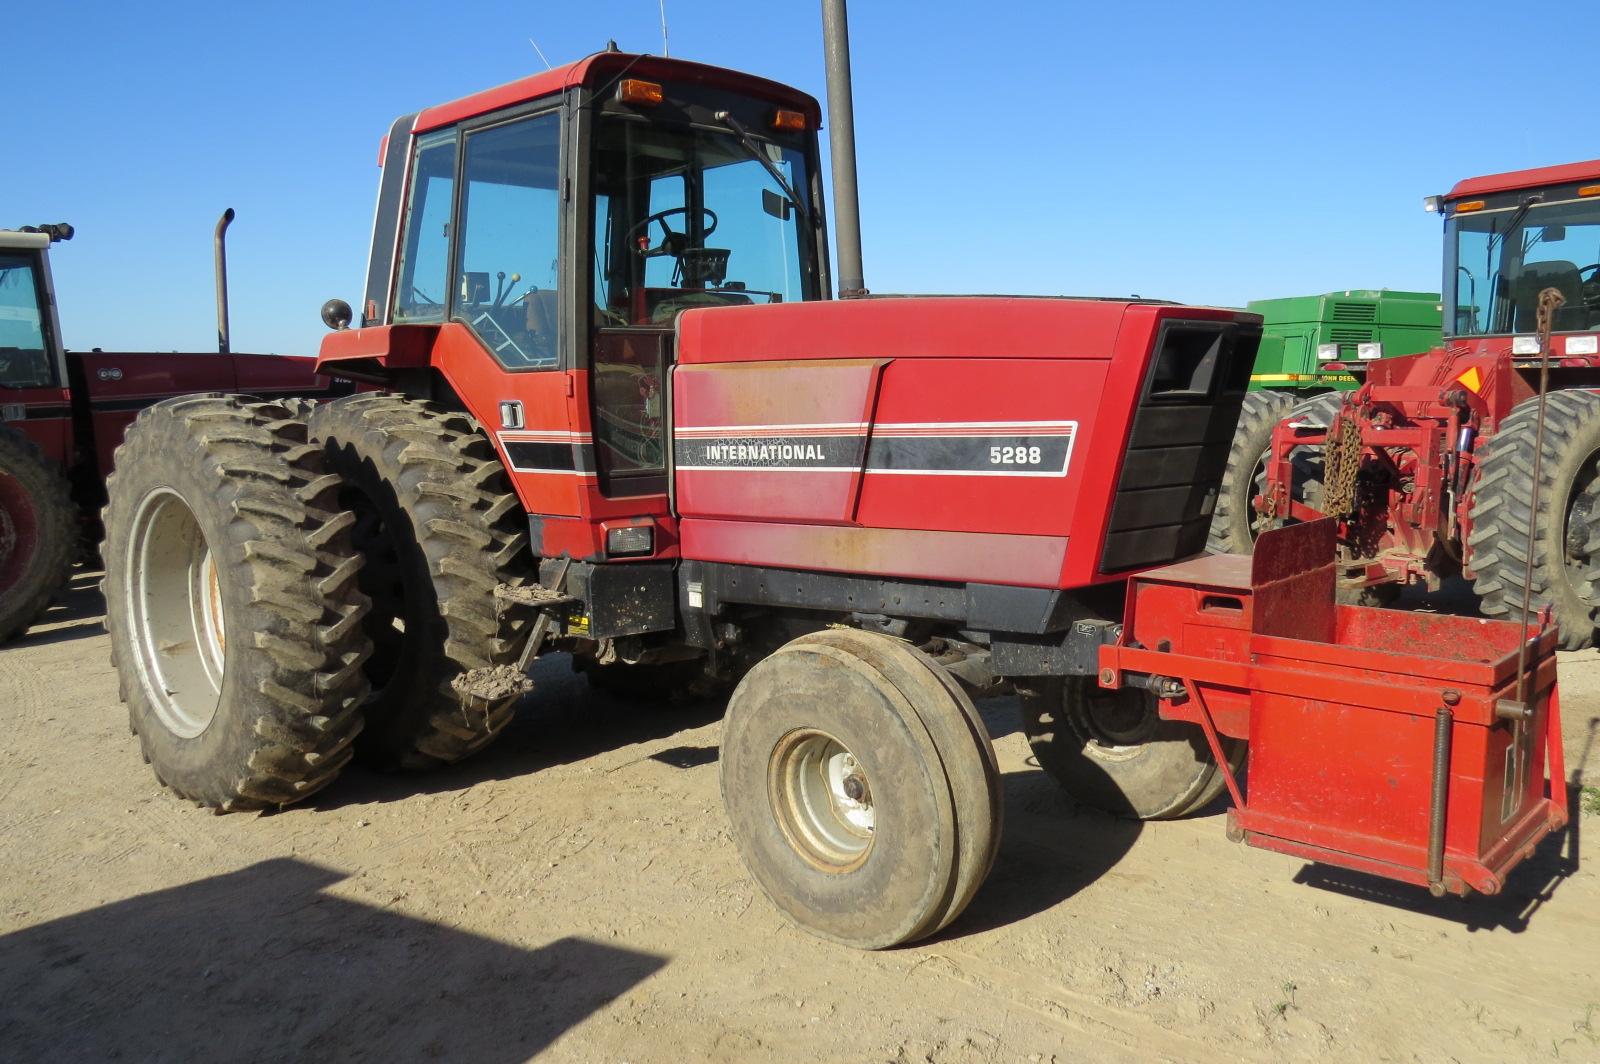 1982 IHC 5288 2WD TRACTOR